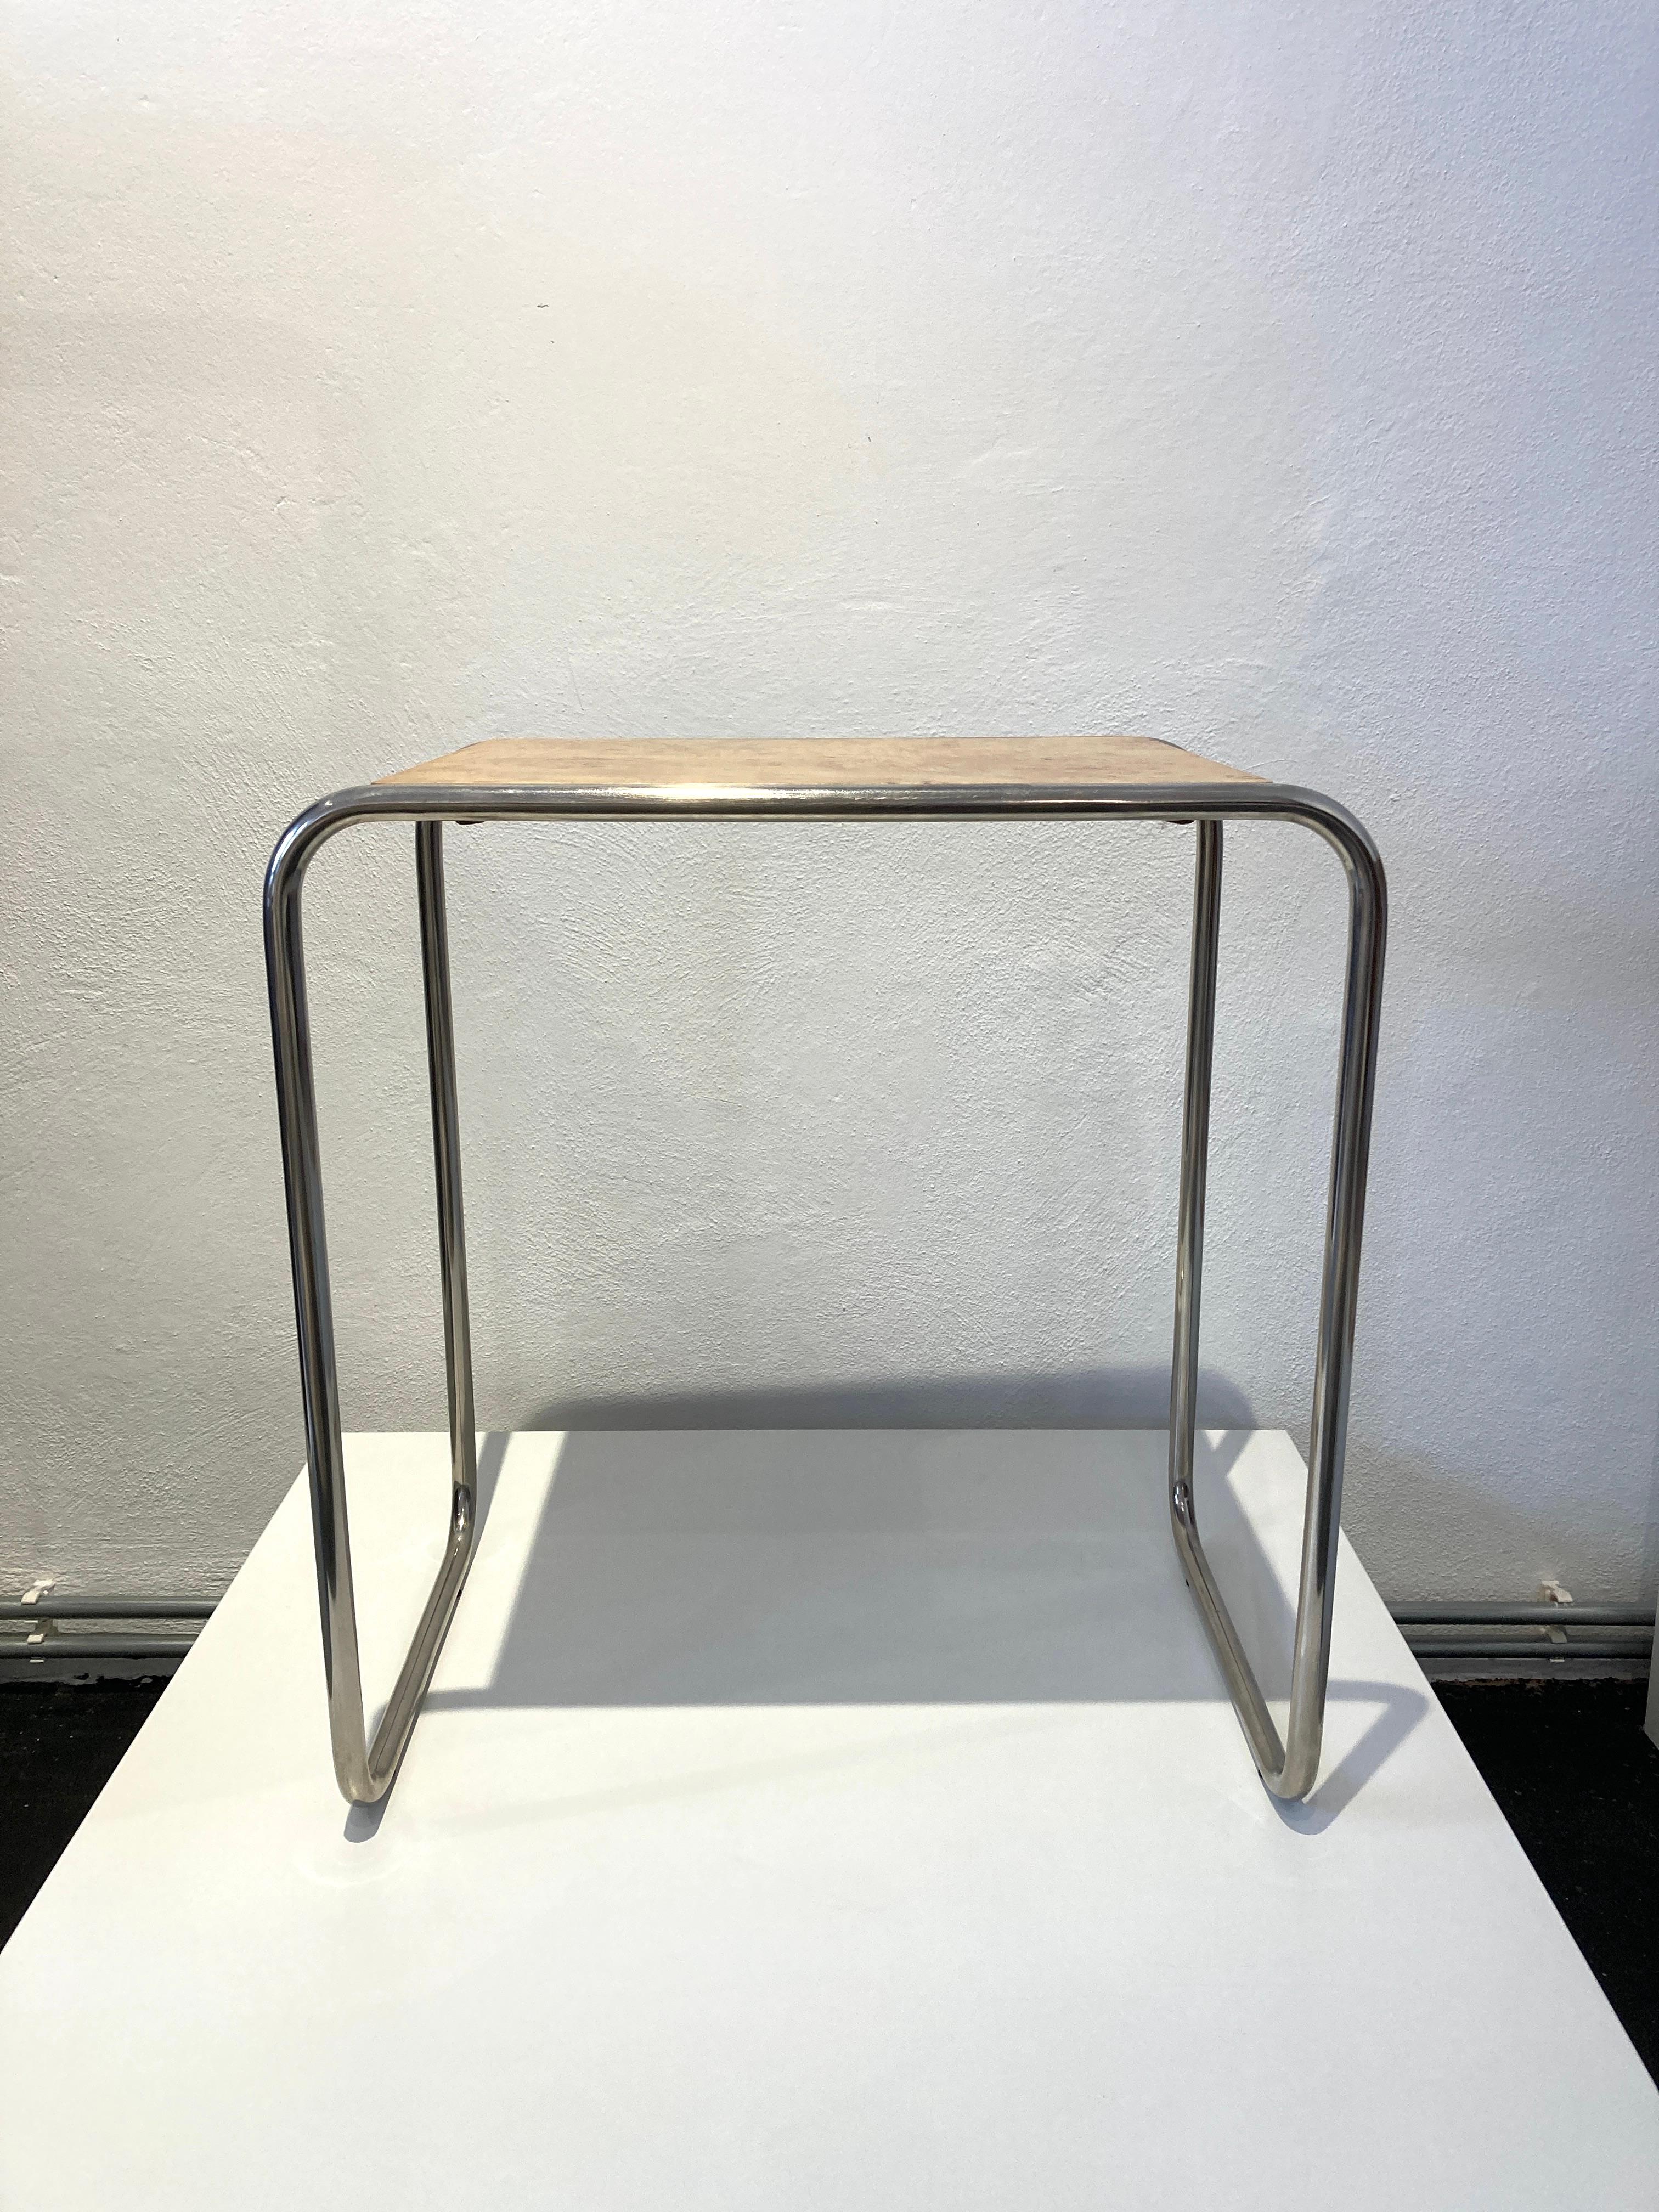 Tubular Steel Table B 9 by Marcel Breuer 1930s
This side table by Marcel Breuer has a construction of nickel-plated tubular steel
and a birch veneered panel. Very nice condition.
 